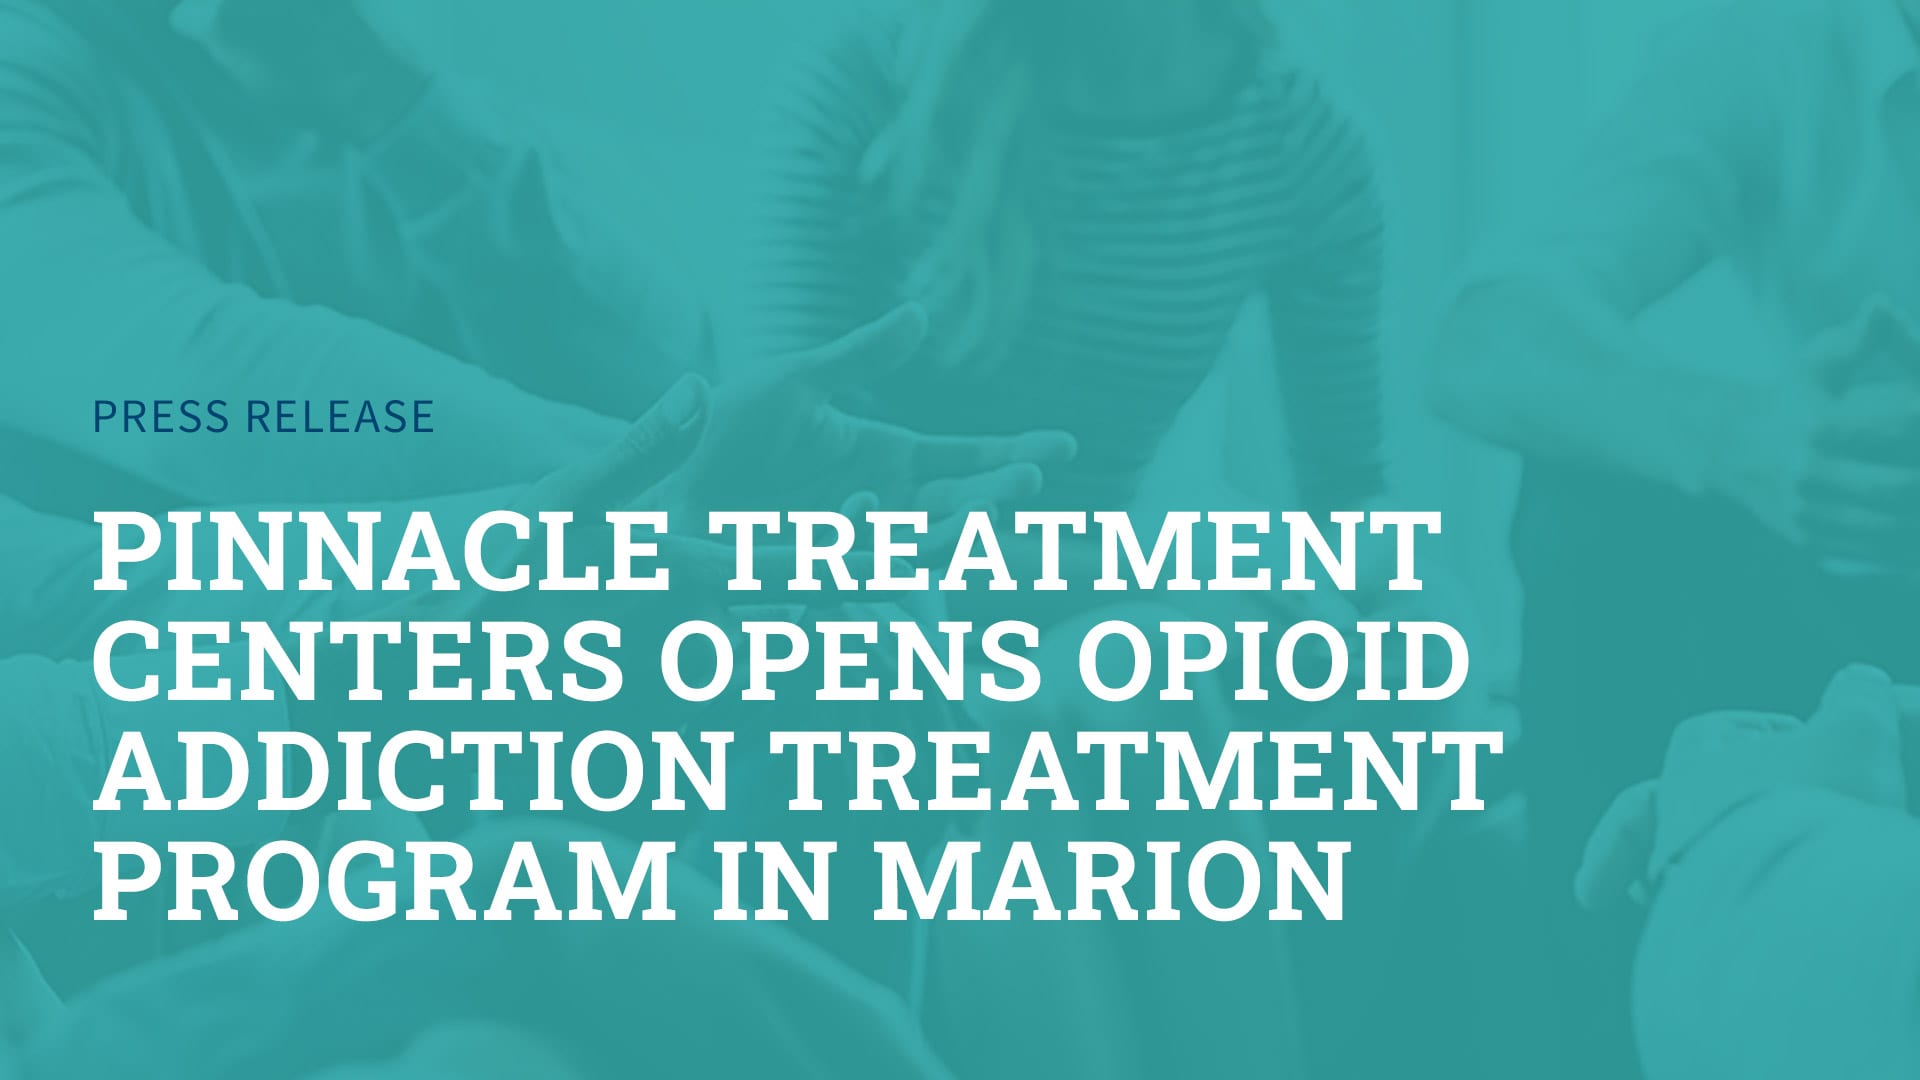 Pinnacle Treatment Centers Opens Opioid Addiction Treatment Program in Marion